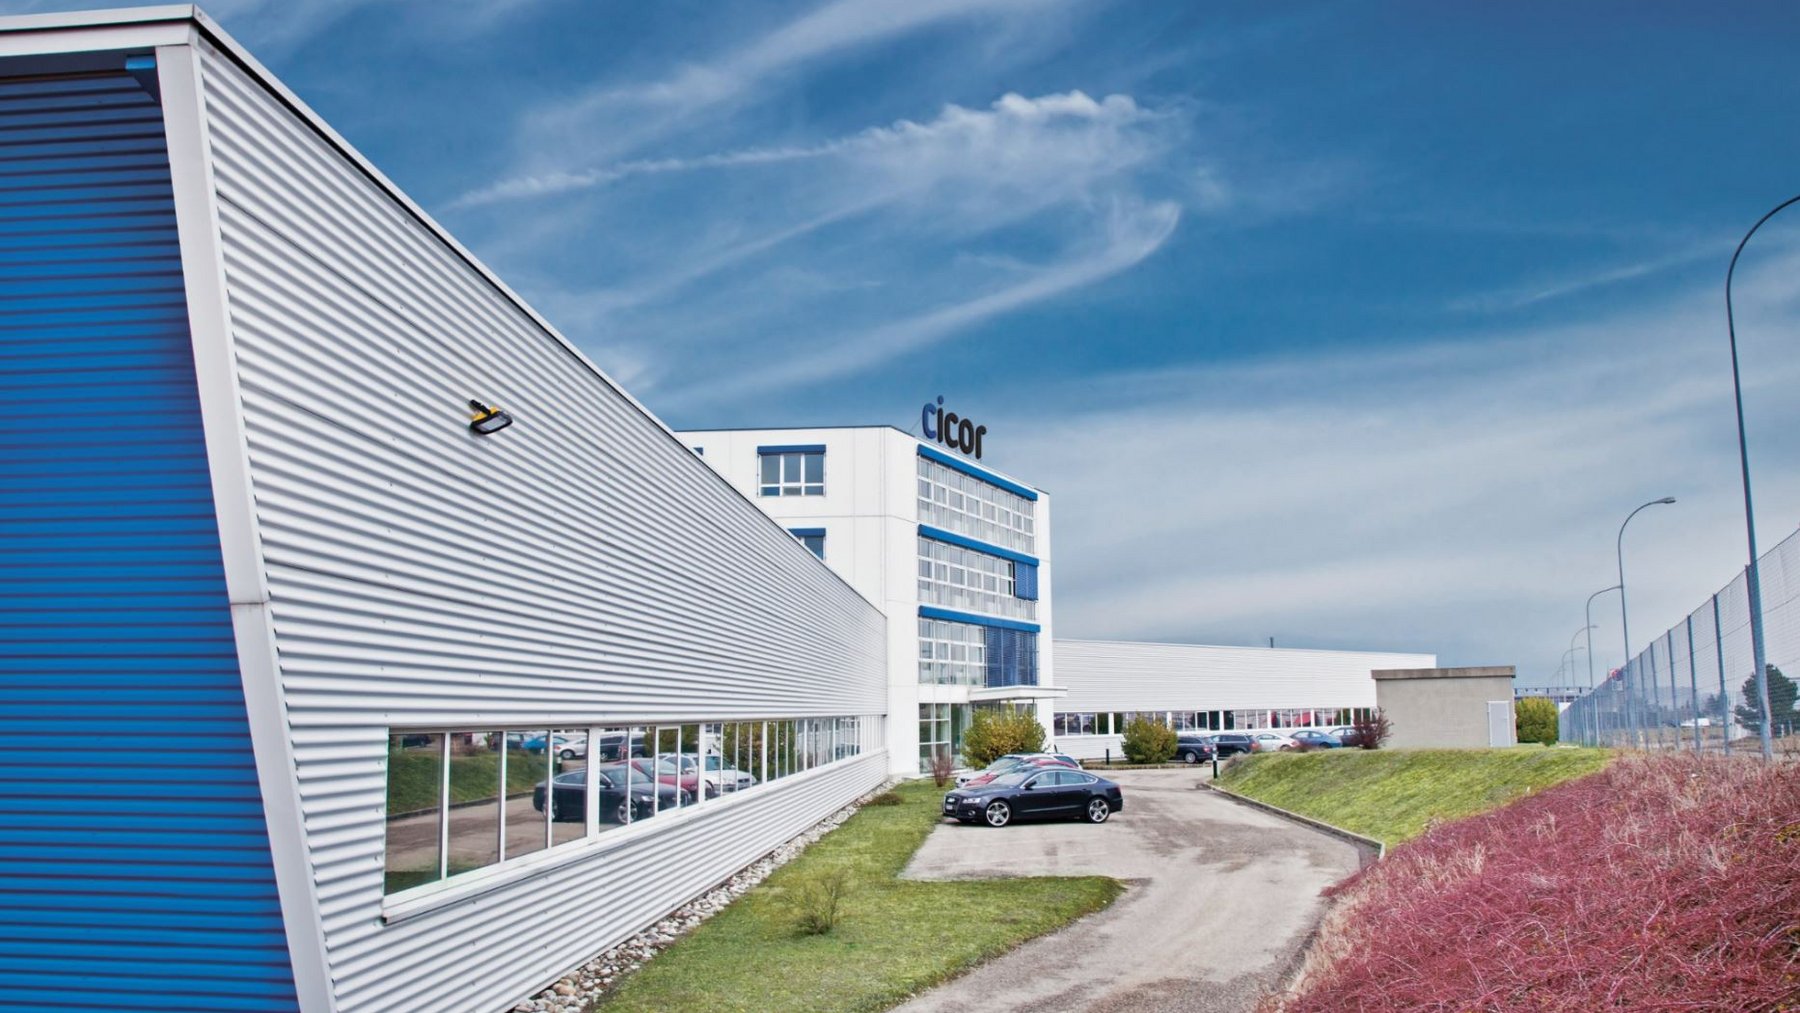 Cicor production site in Boudry, Switzerland